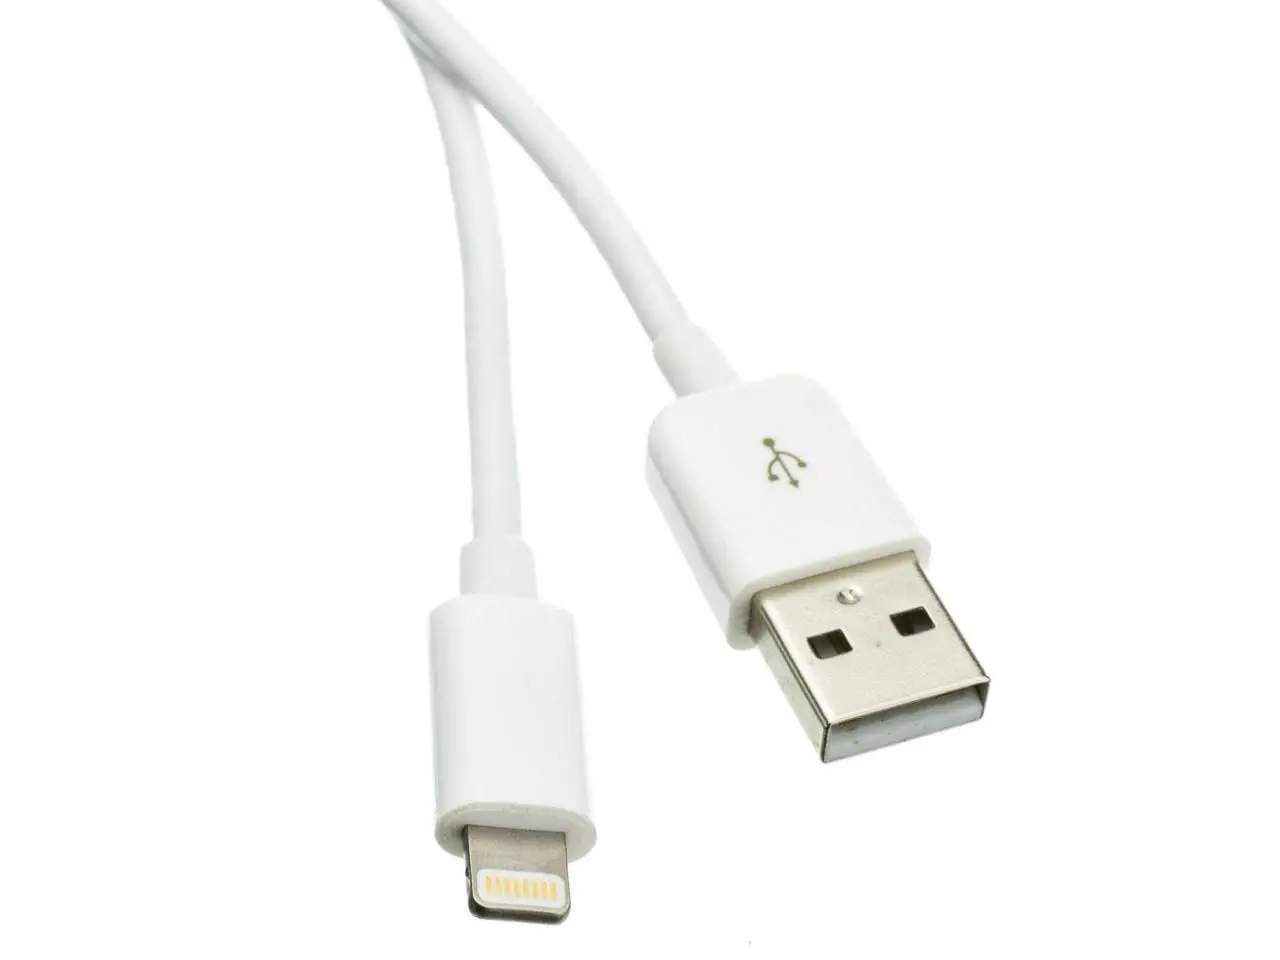 A iPhone/iPod/iPad to USB Cable White designed for iPhone, iPod, and iPad, featuring a USB-A connector on one end and a lightning connector on the other, all set against a white background.